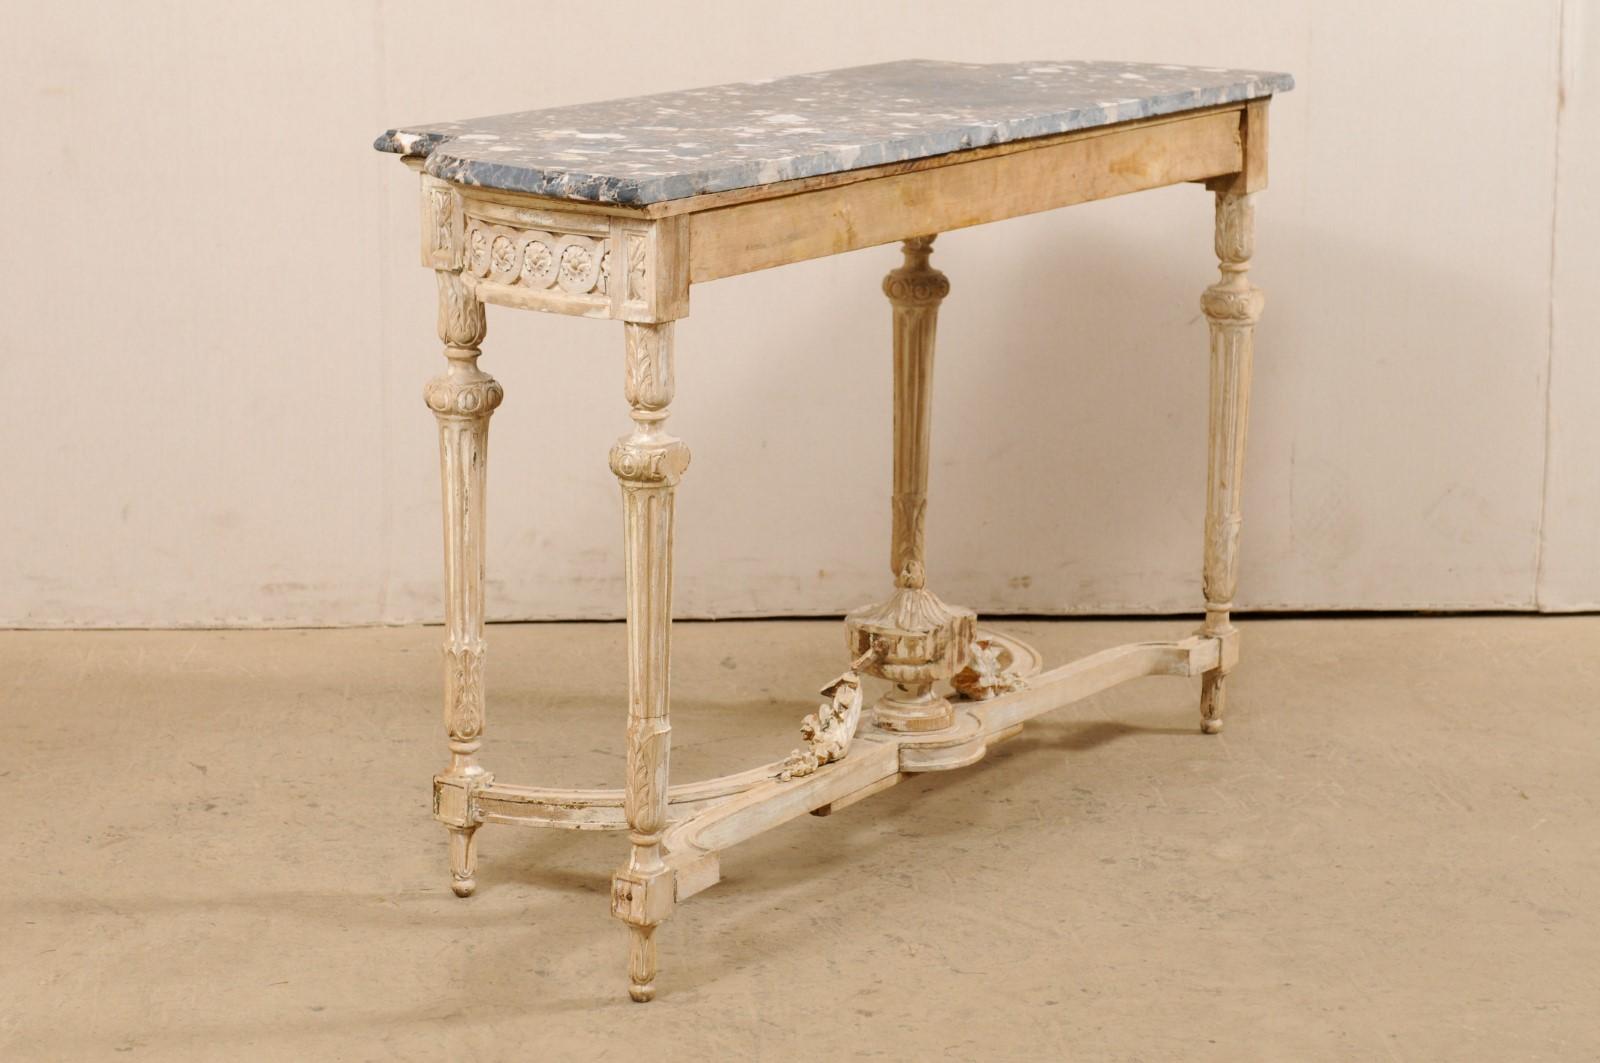 Antique French Marble-Top Console Table with Carved Urn & Foliage at Underside 6